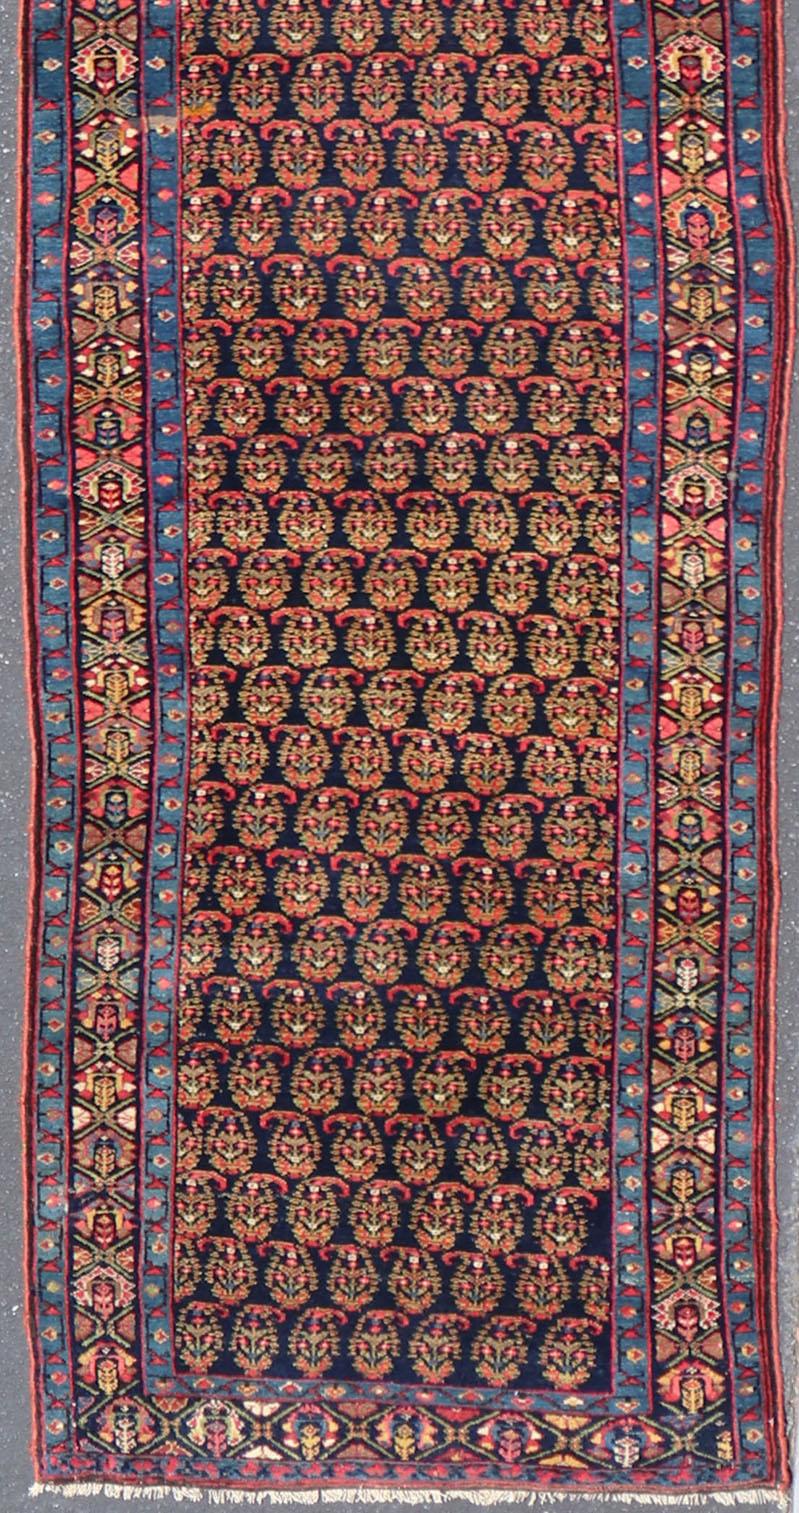 Antique Persian Malayer Paisley Design Runner in Red, Orange, and Blue In Good Condition For Sale In Atlanta, GA